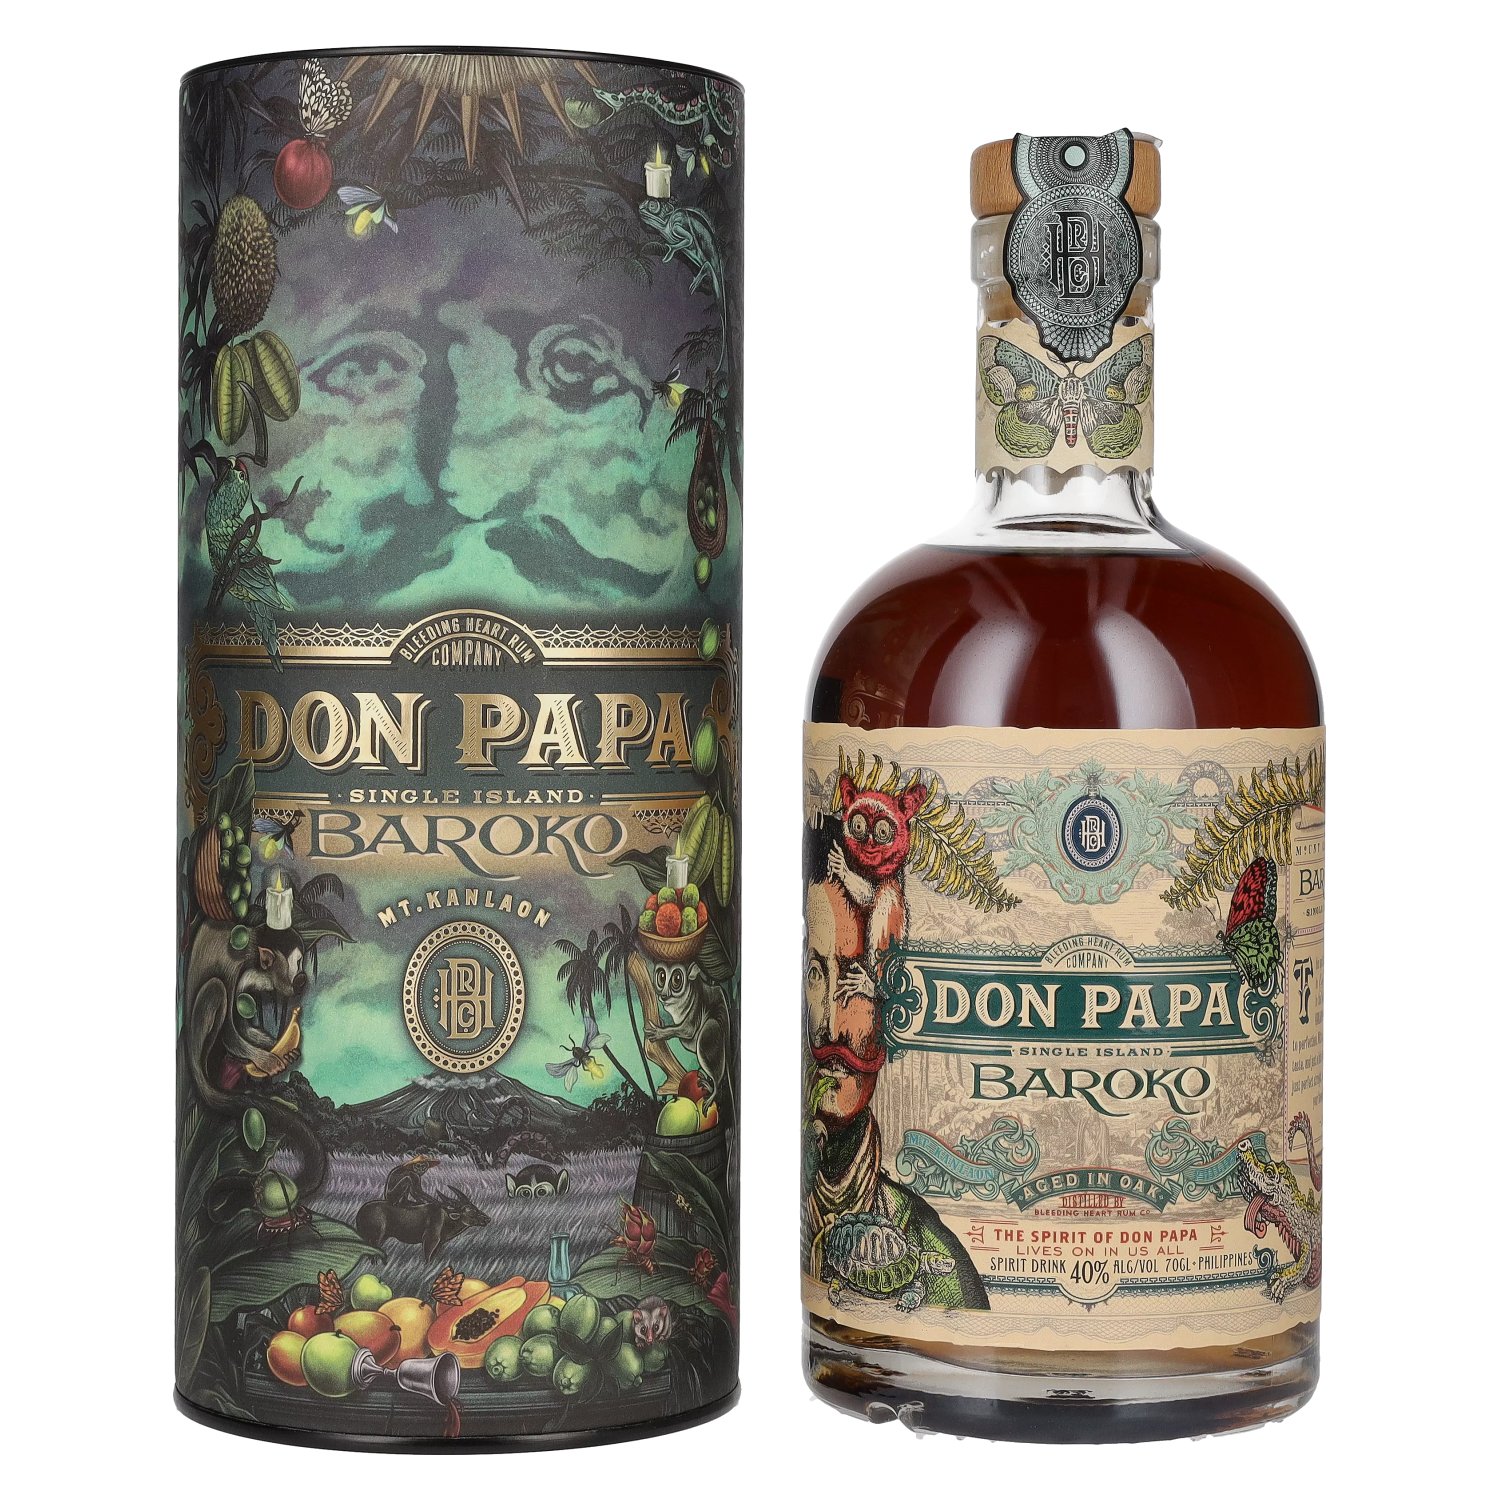 Don Papa BAROKO 0,7l Limited in Giftbox 40% Vol. Edition Harvest Canister